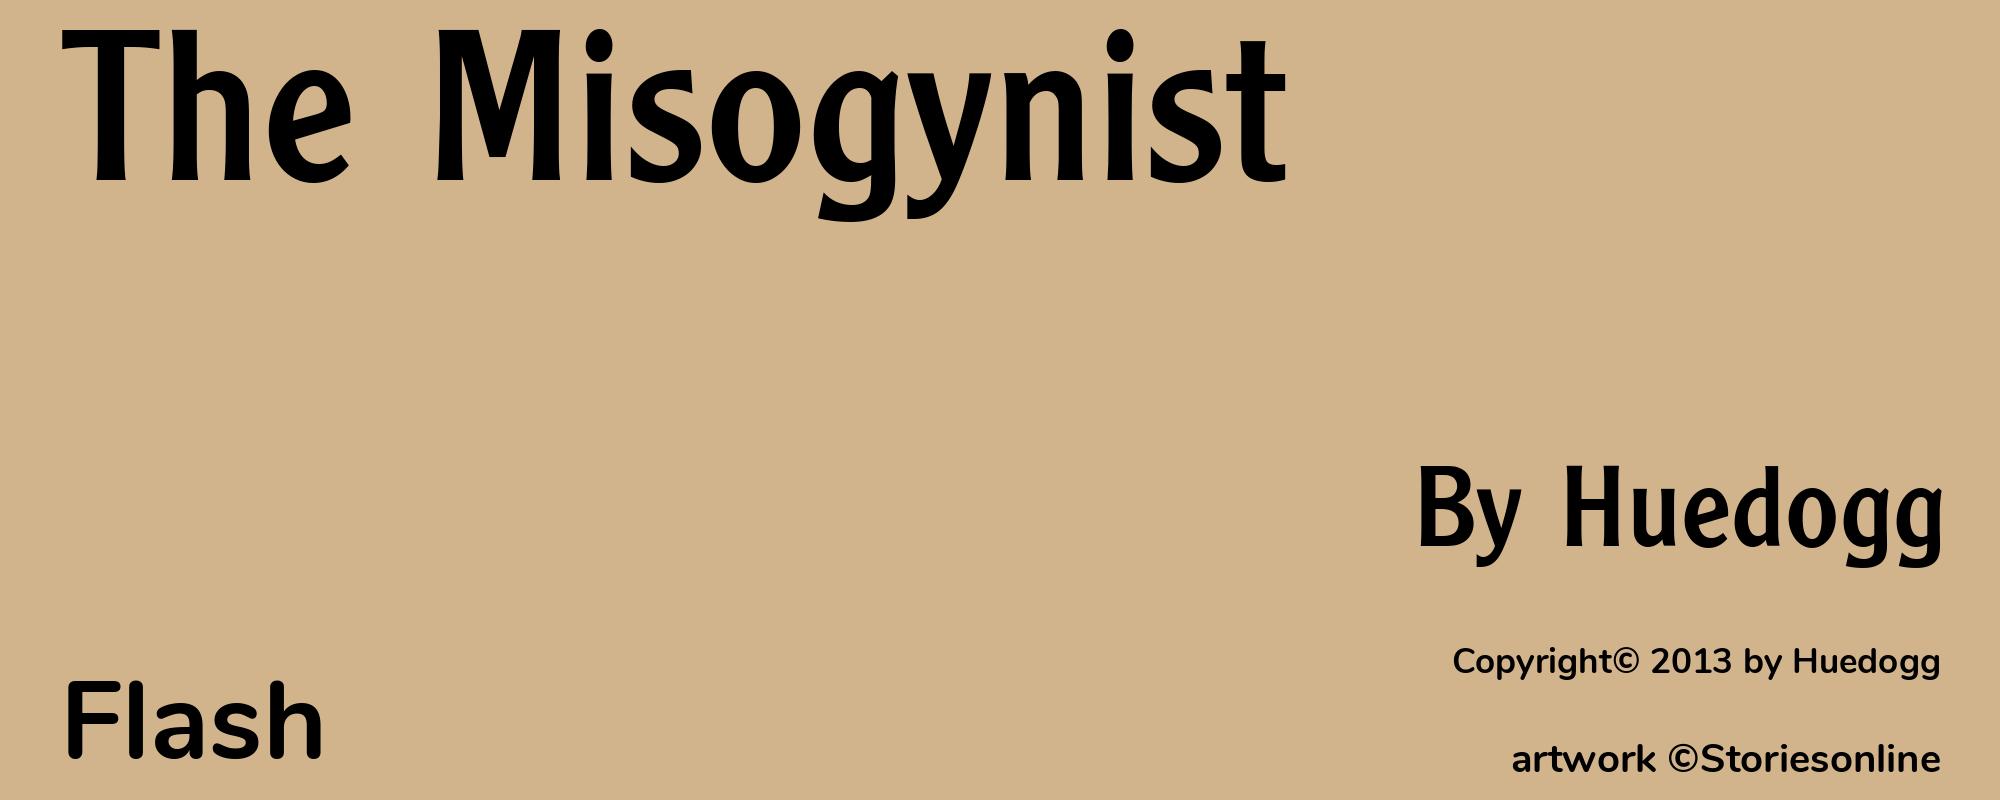 The Misogynist - Cover